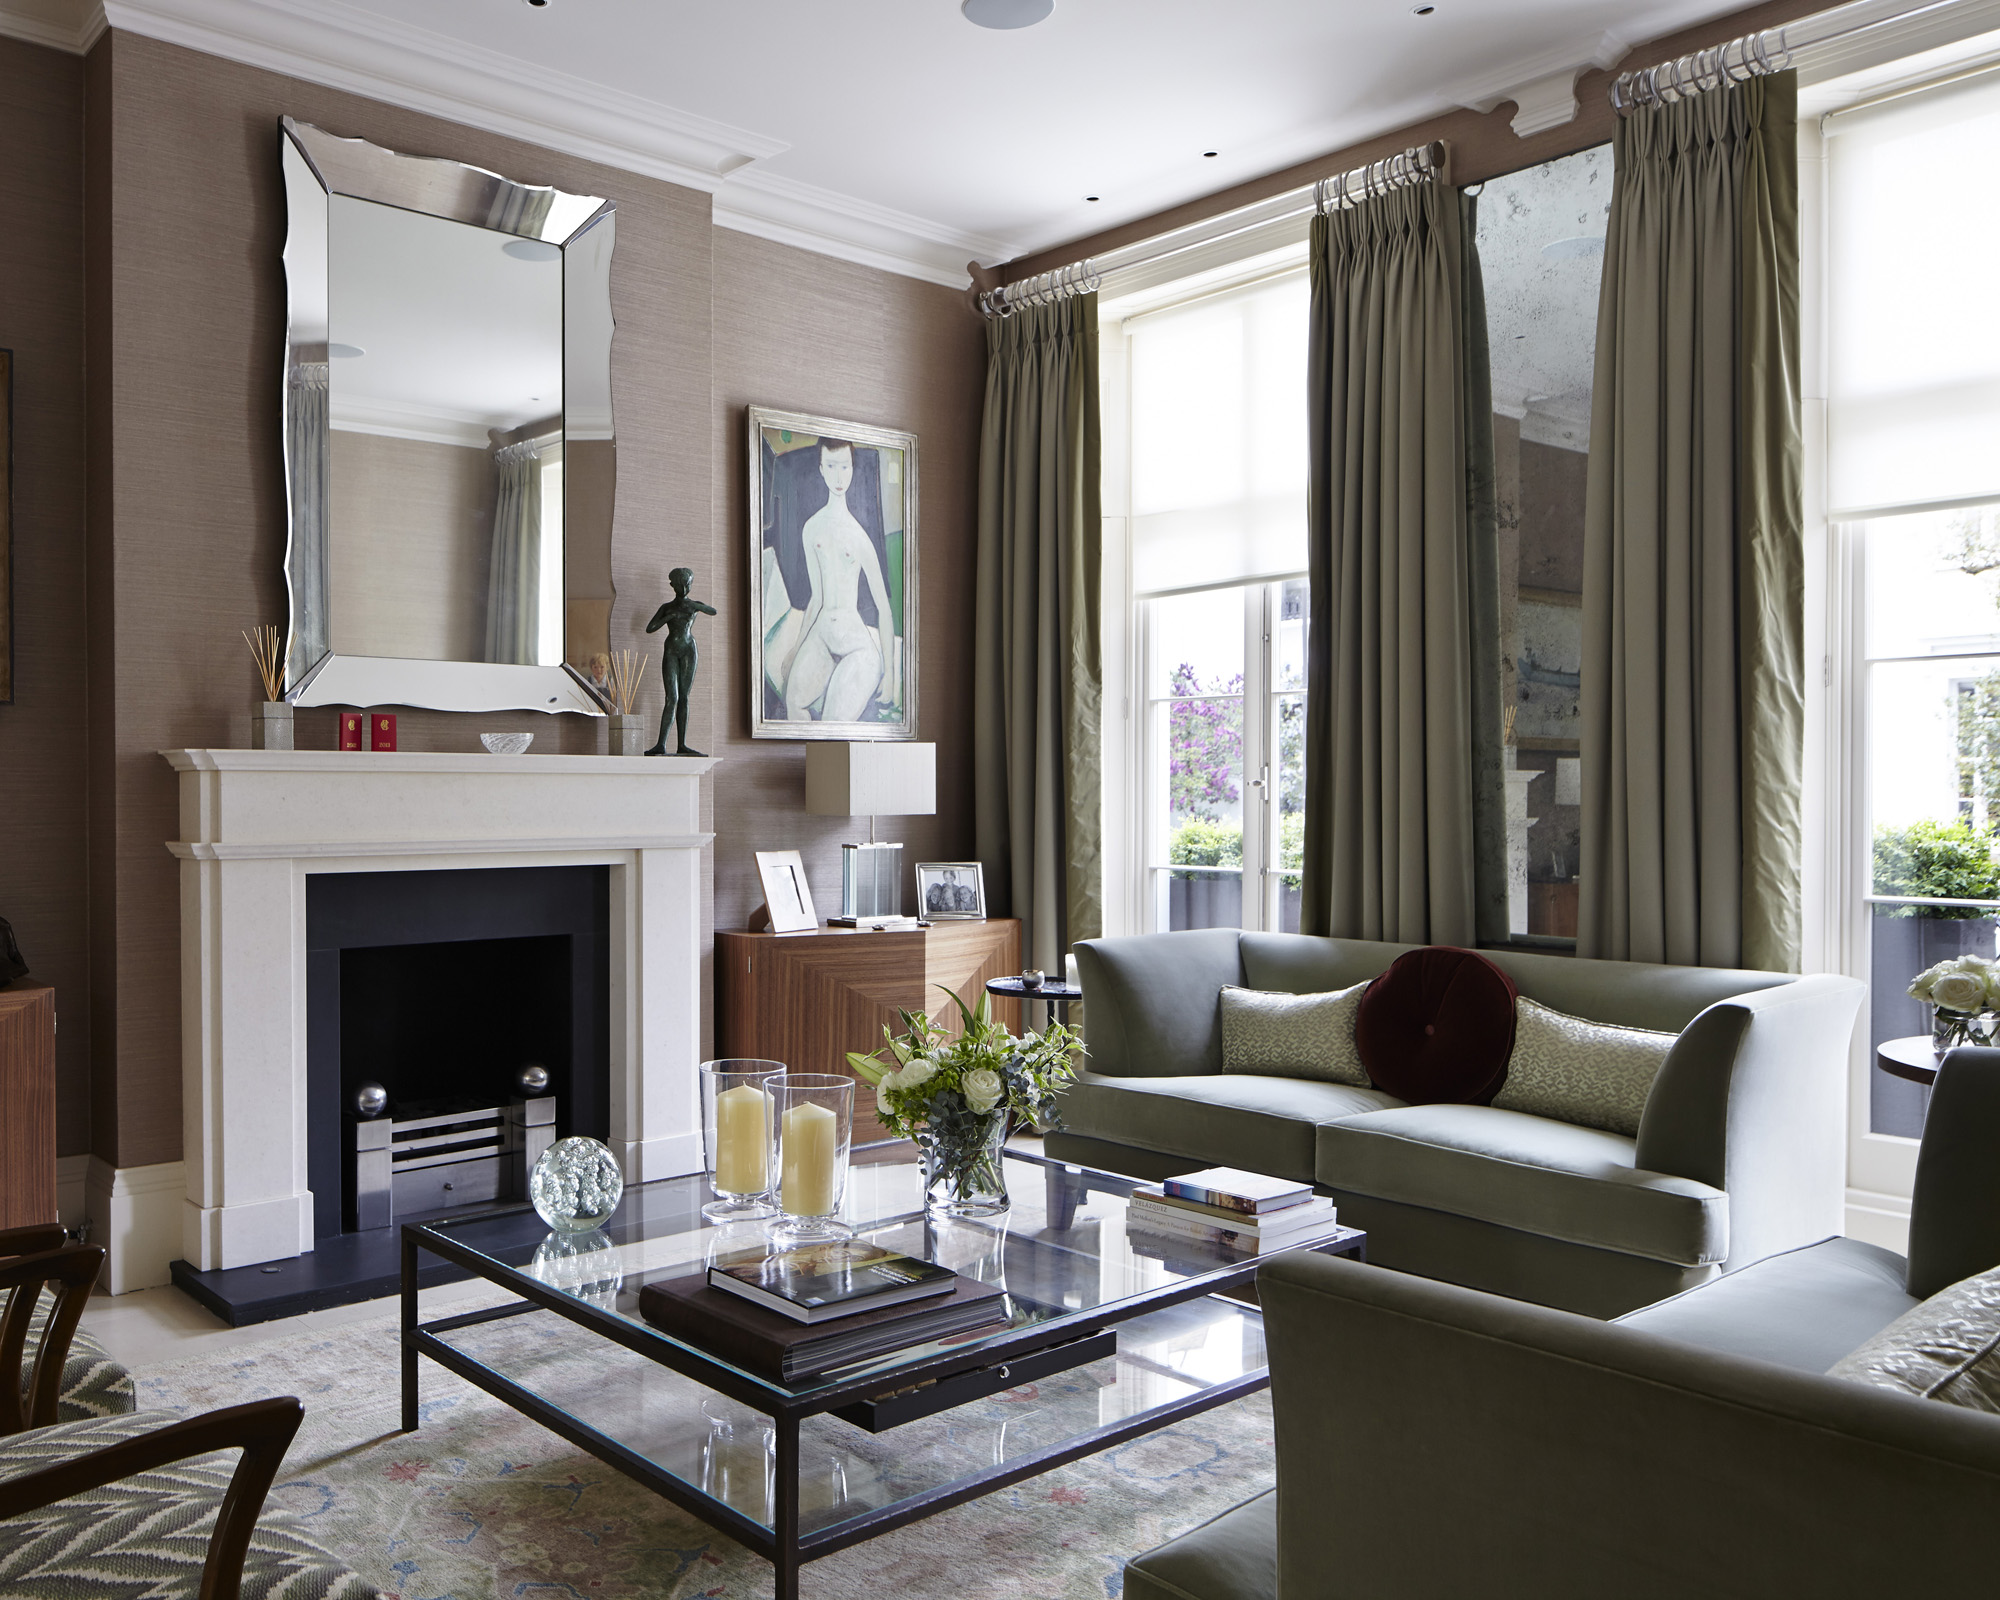 A living room mirror idea with a large bevelled mirror over the fireplace in modern room